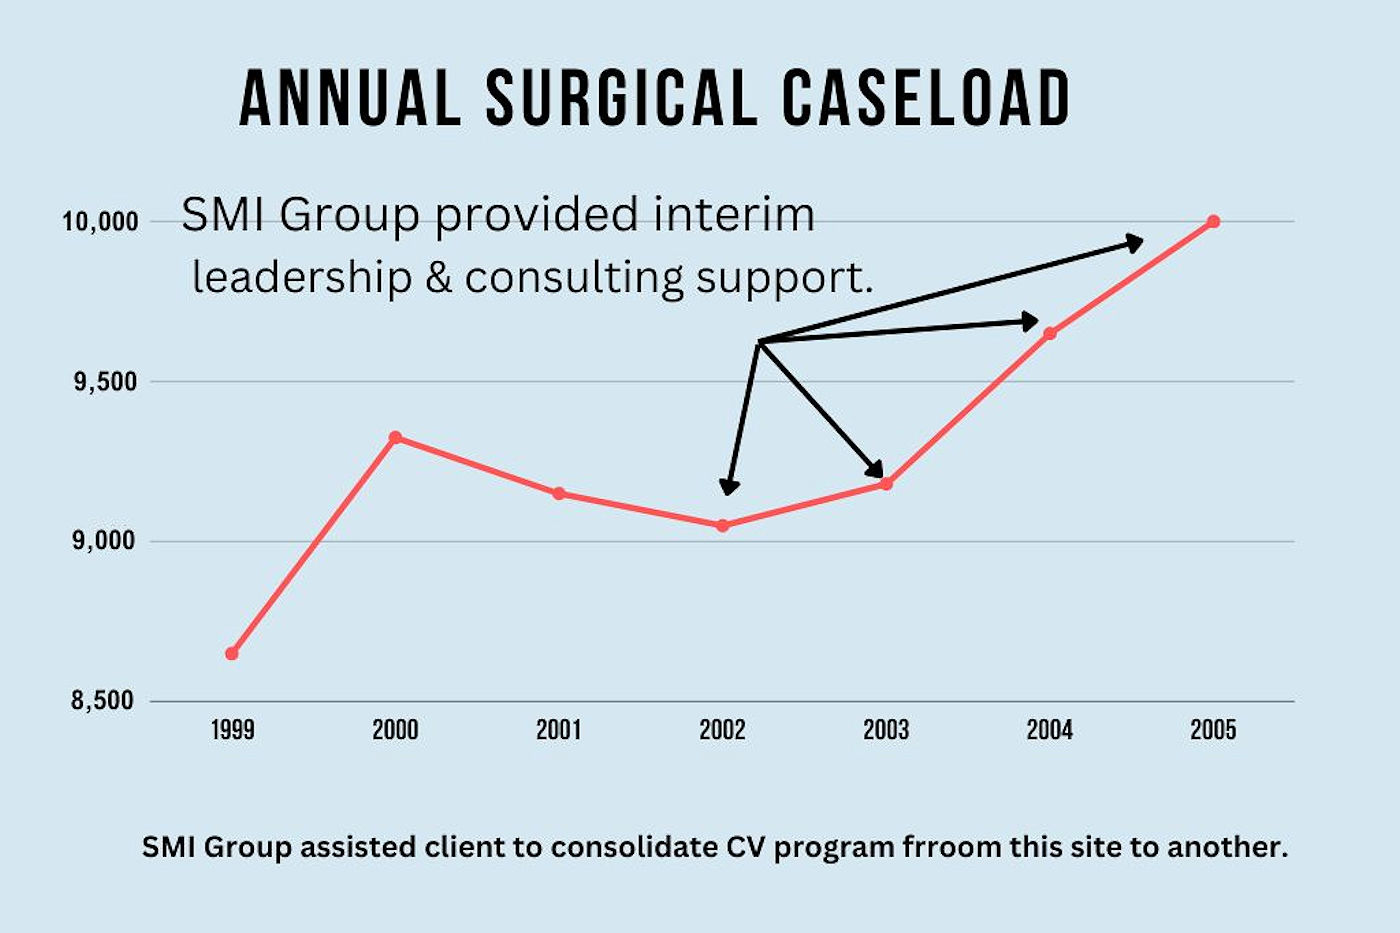 "Backfilling" Volume Lost via CV Program Consolidation - Annual Surgical Caseload - SMI Group Case Study